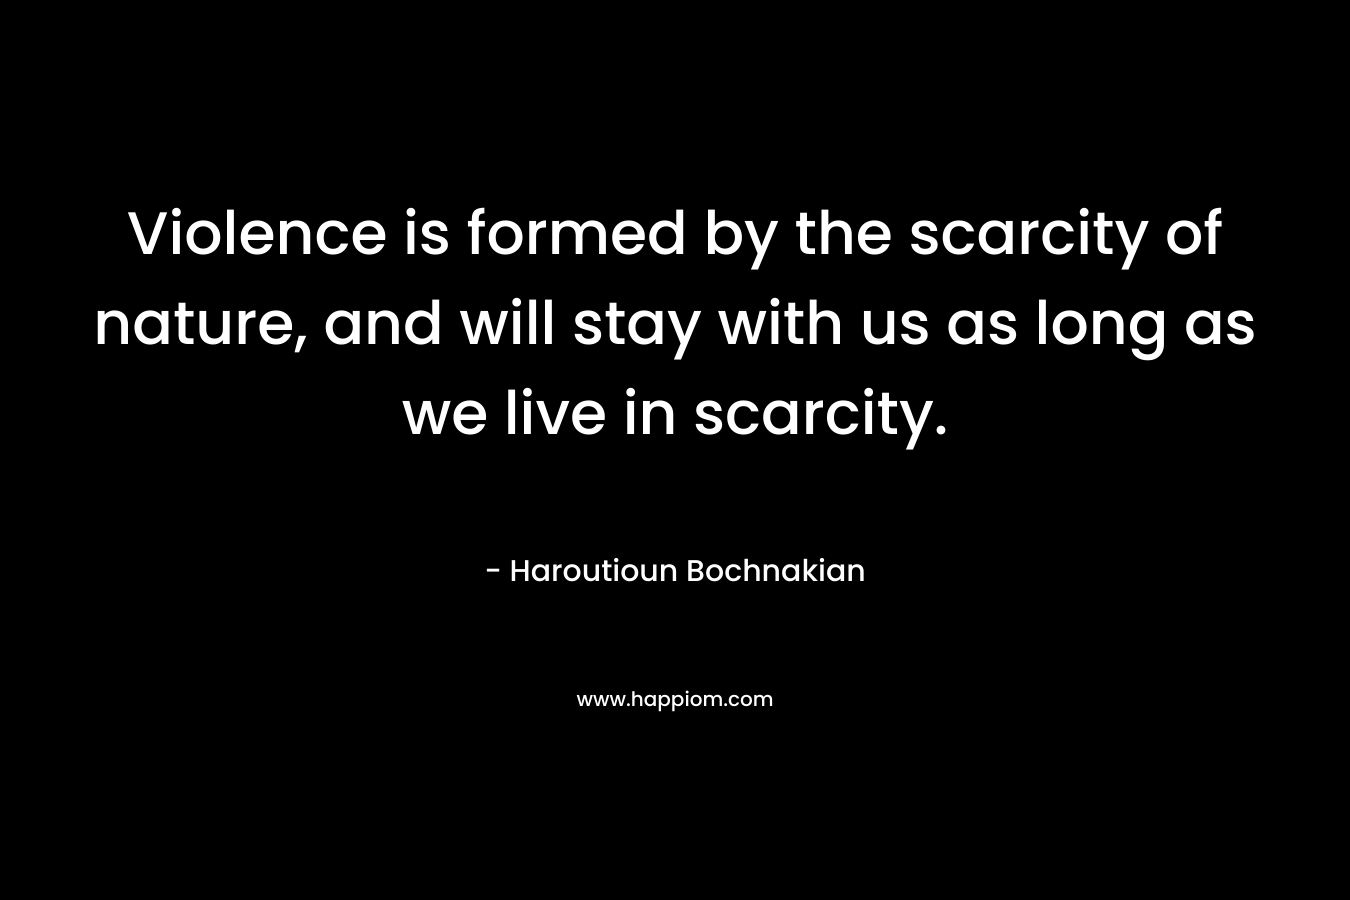 Violence is formed by the scarcity of nature, and will stay with us as long as we live in scarcity.